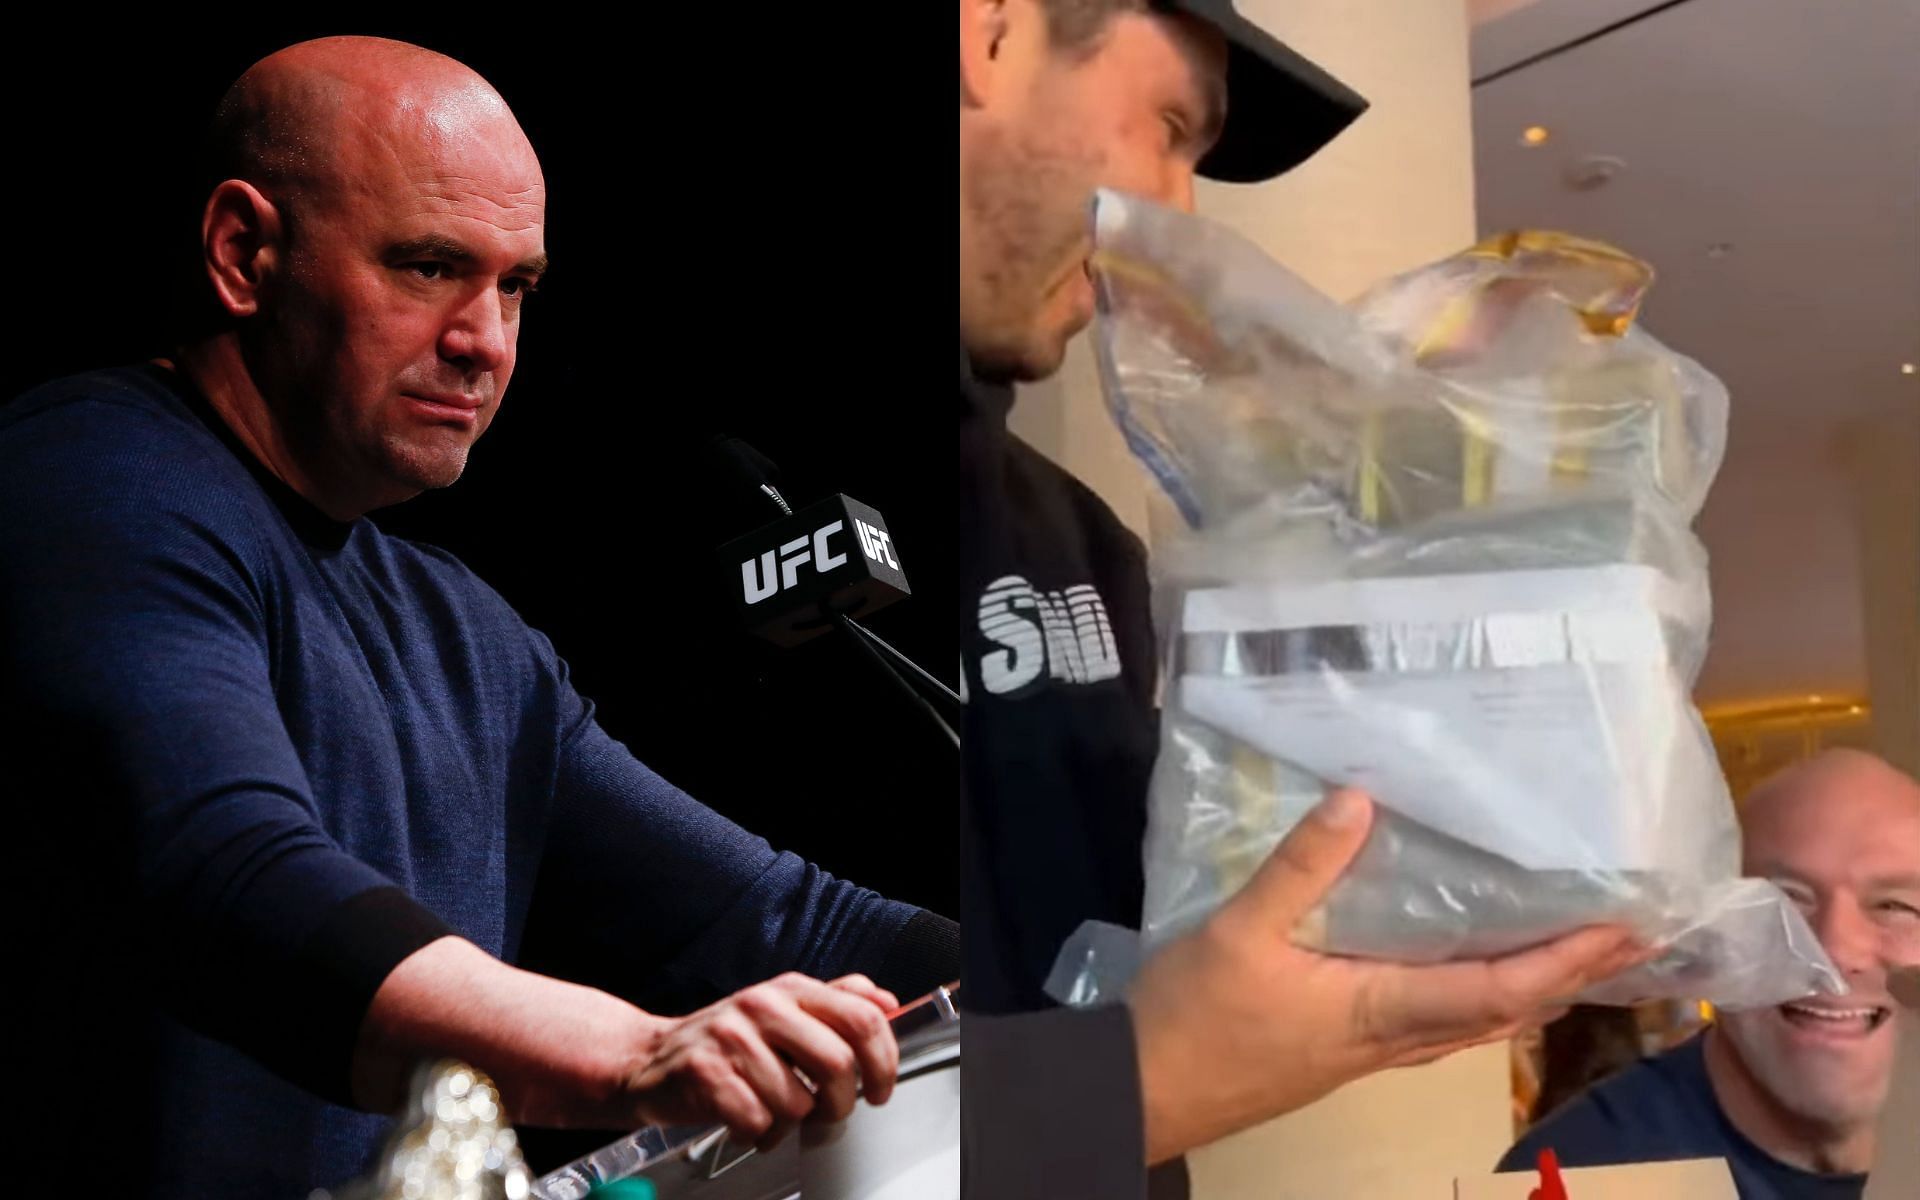 Dana White (left) was trolled on his birthday for his gift to Kyle Forgeard (right) [Image via @KyleForgeard on Twitter]